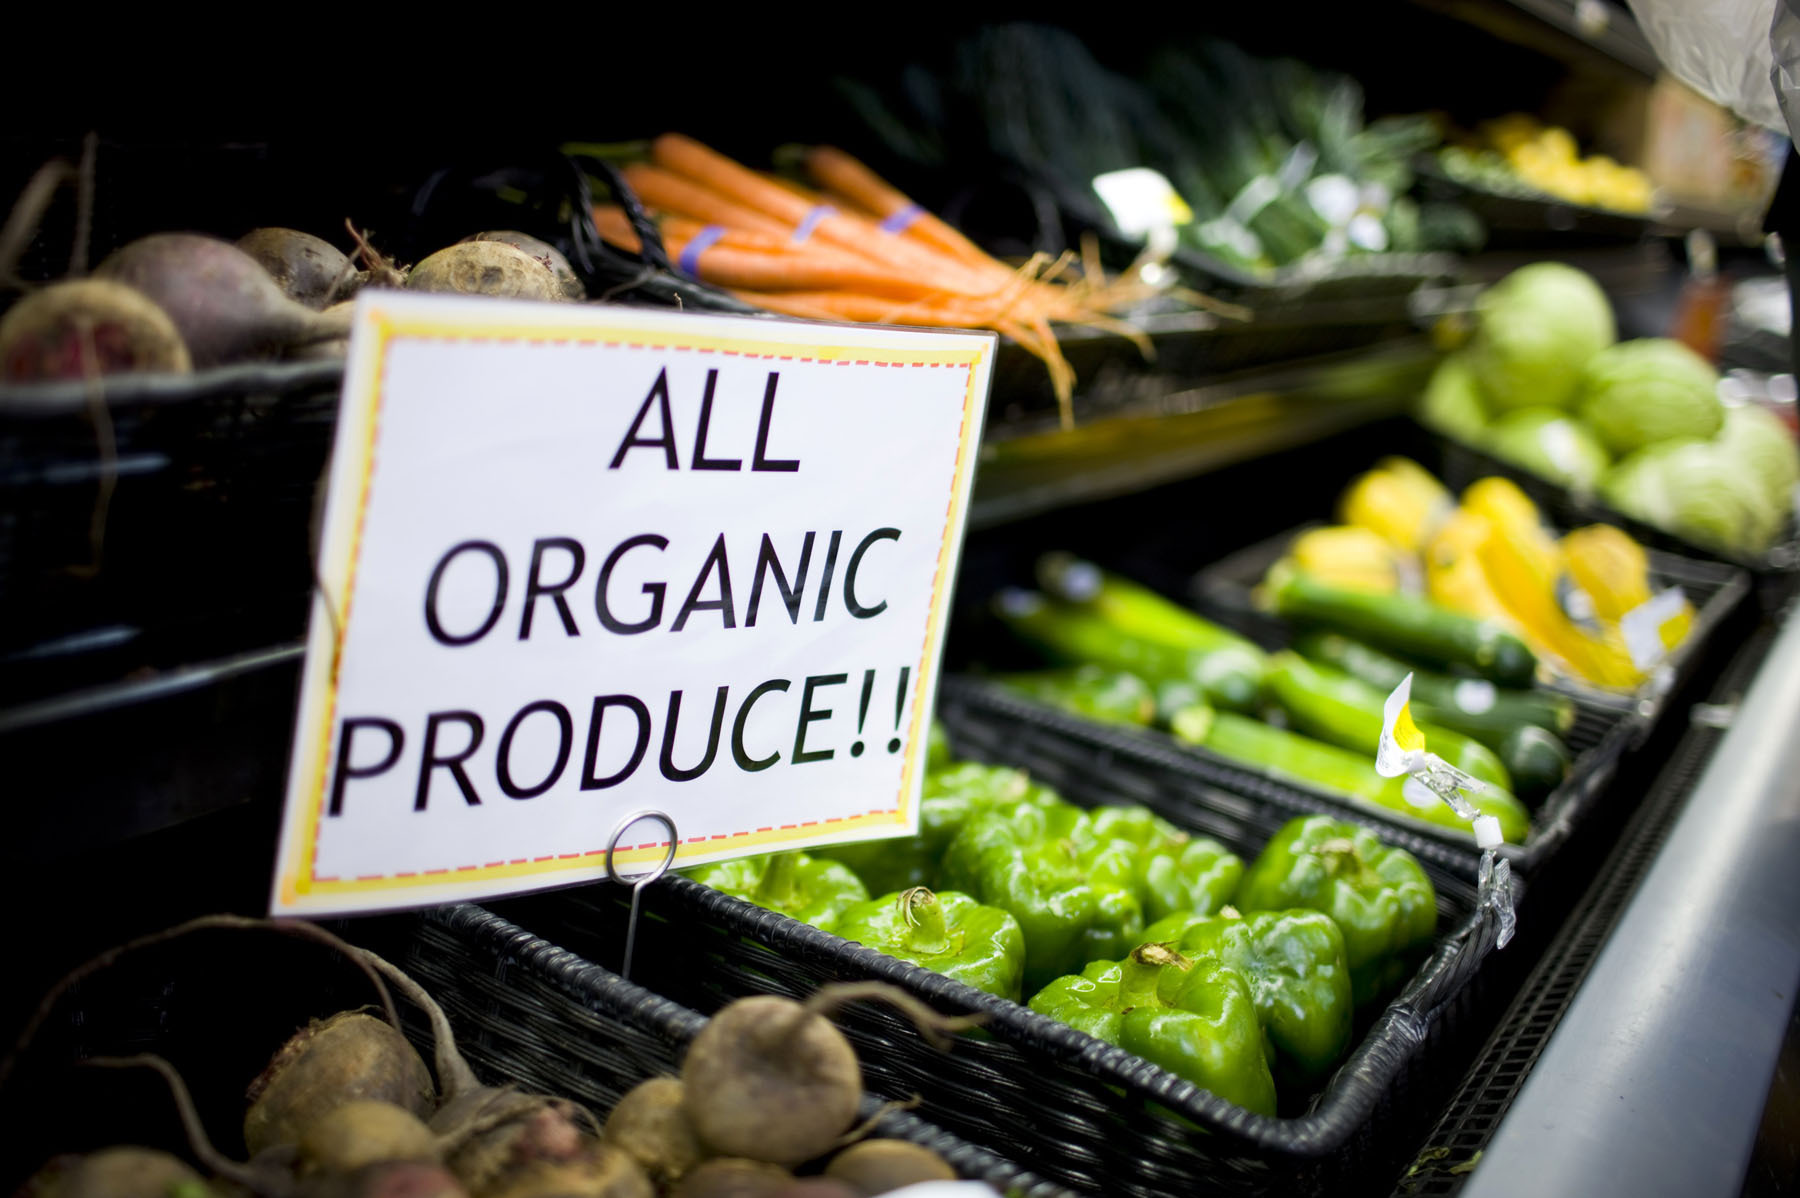 Investigators at the U.S. Department of Agriculture have discovered cases of organic fraud abroad as well as in the U.S. In 2013, 19 farmers or food companies were fined a total of $87 million for misusing the organic label. Photo: Mark Andersen/Rubberball/Corbi